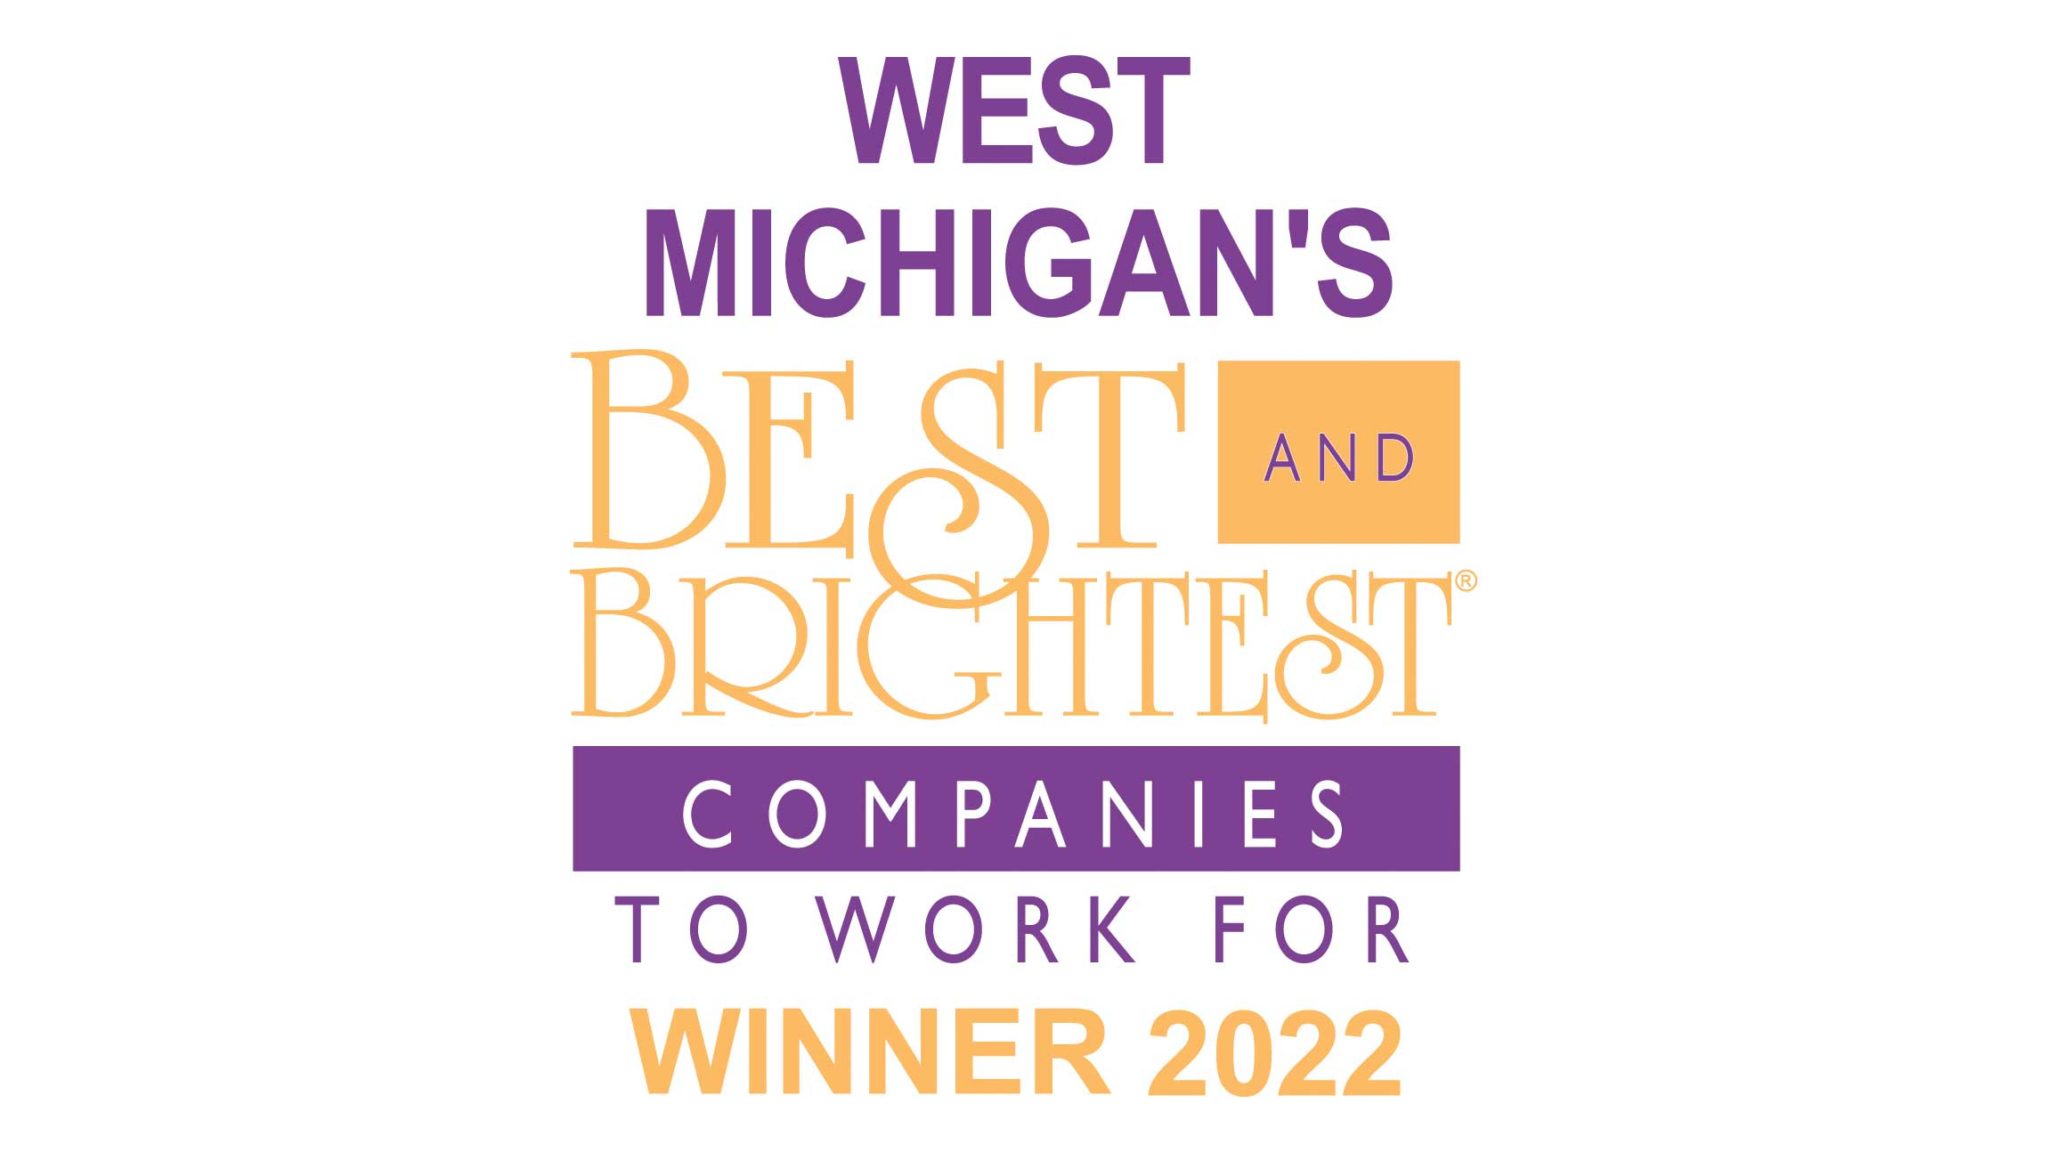 West Michigan's Best and Brightest Companies To Work For logo.